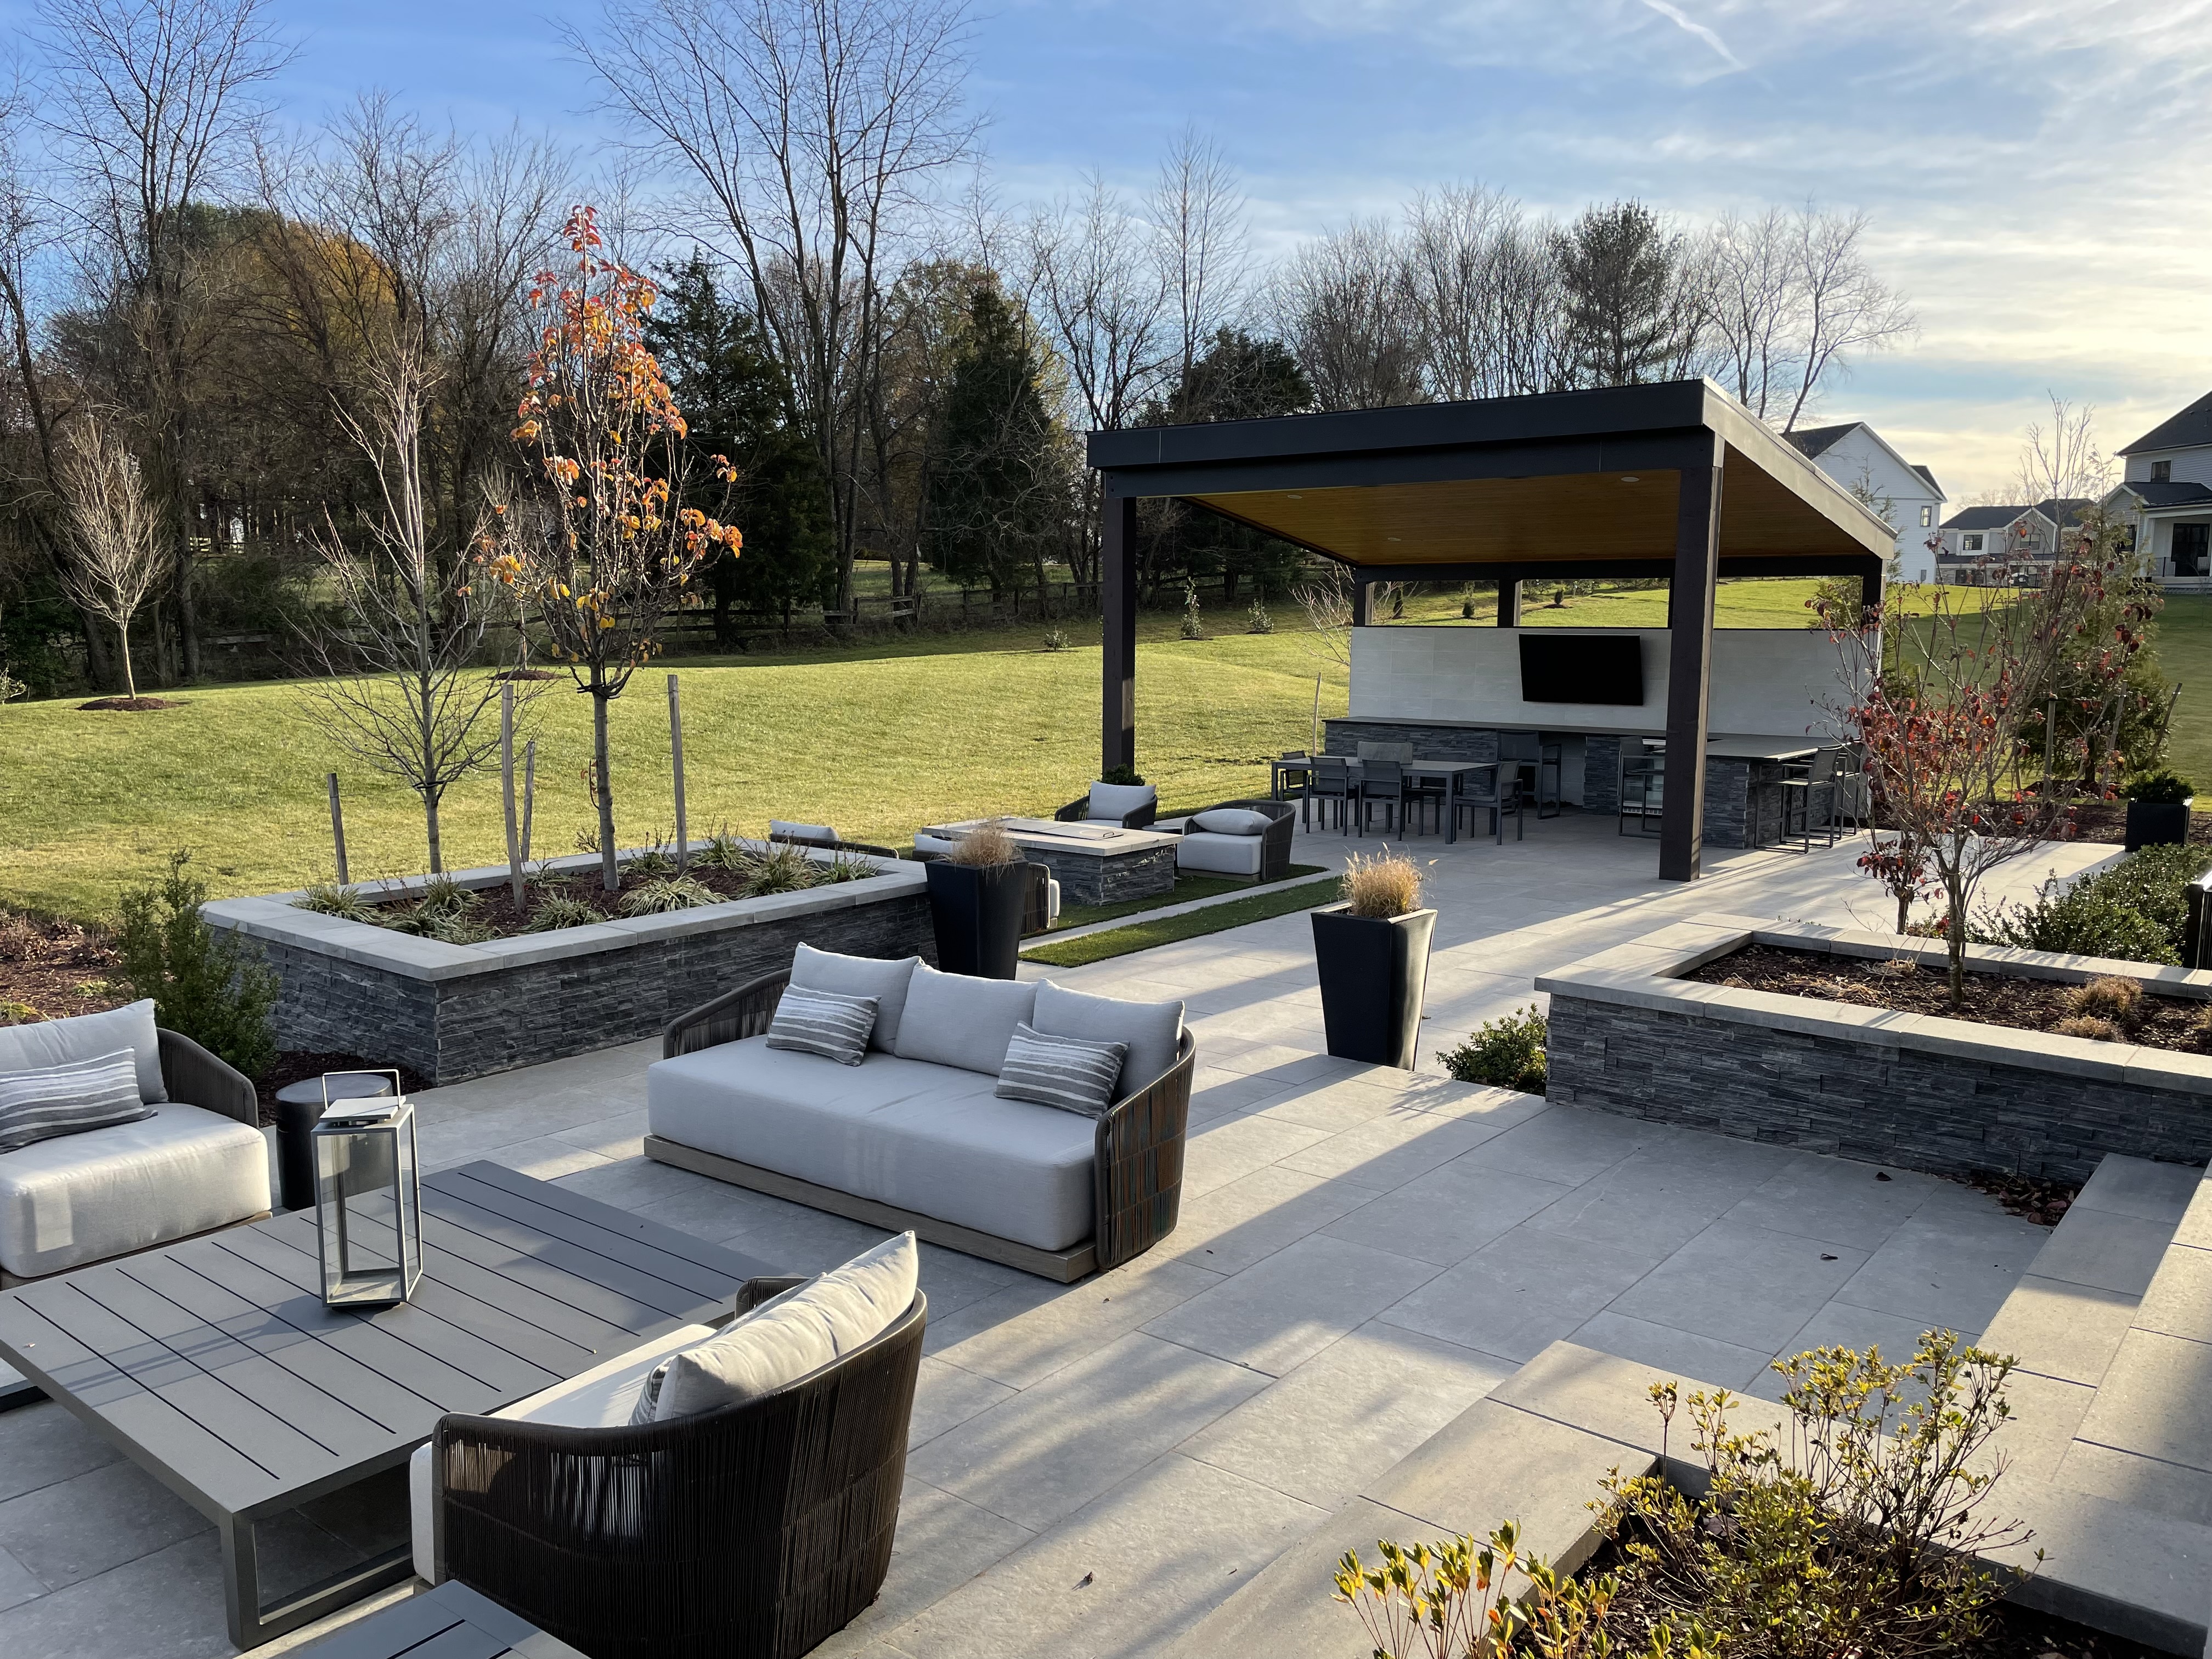 Image of a backyard patio and seating